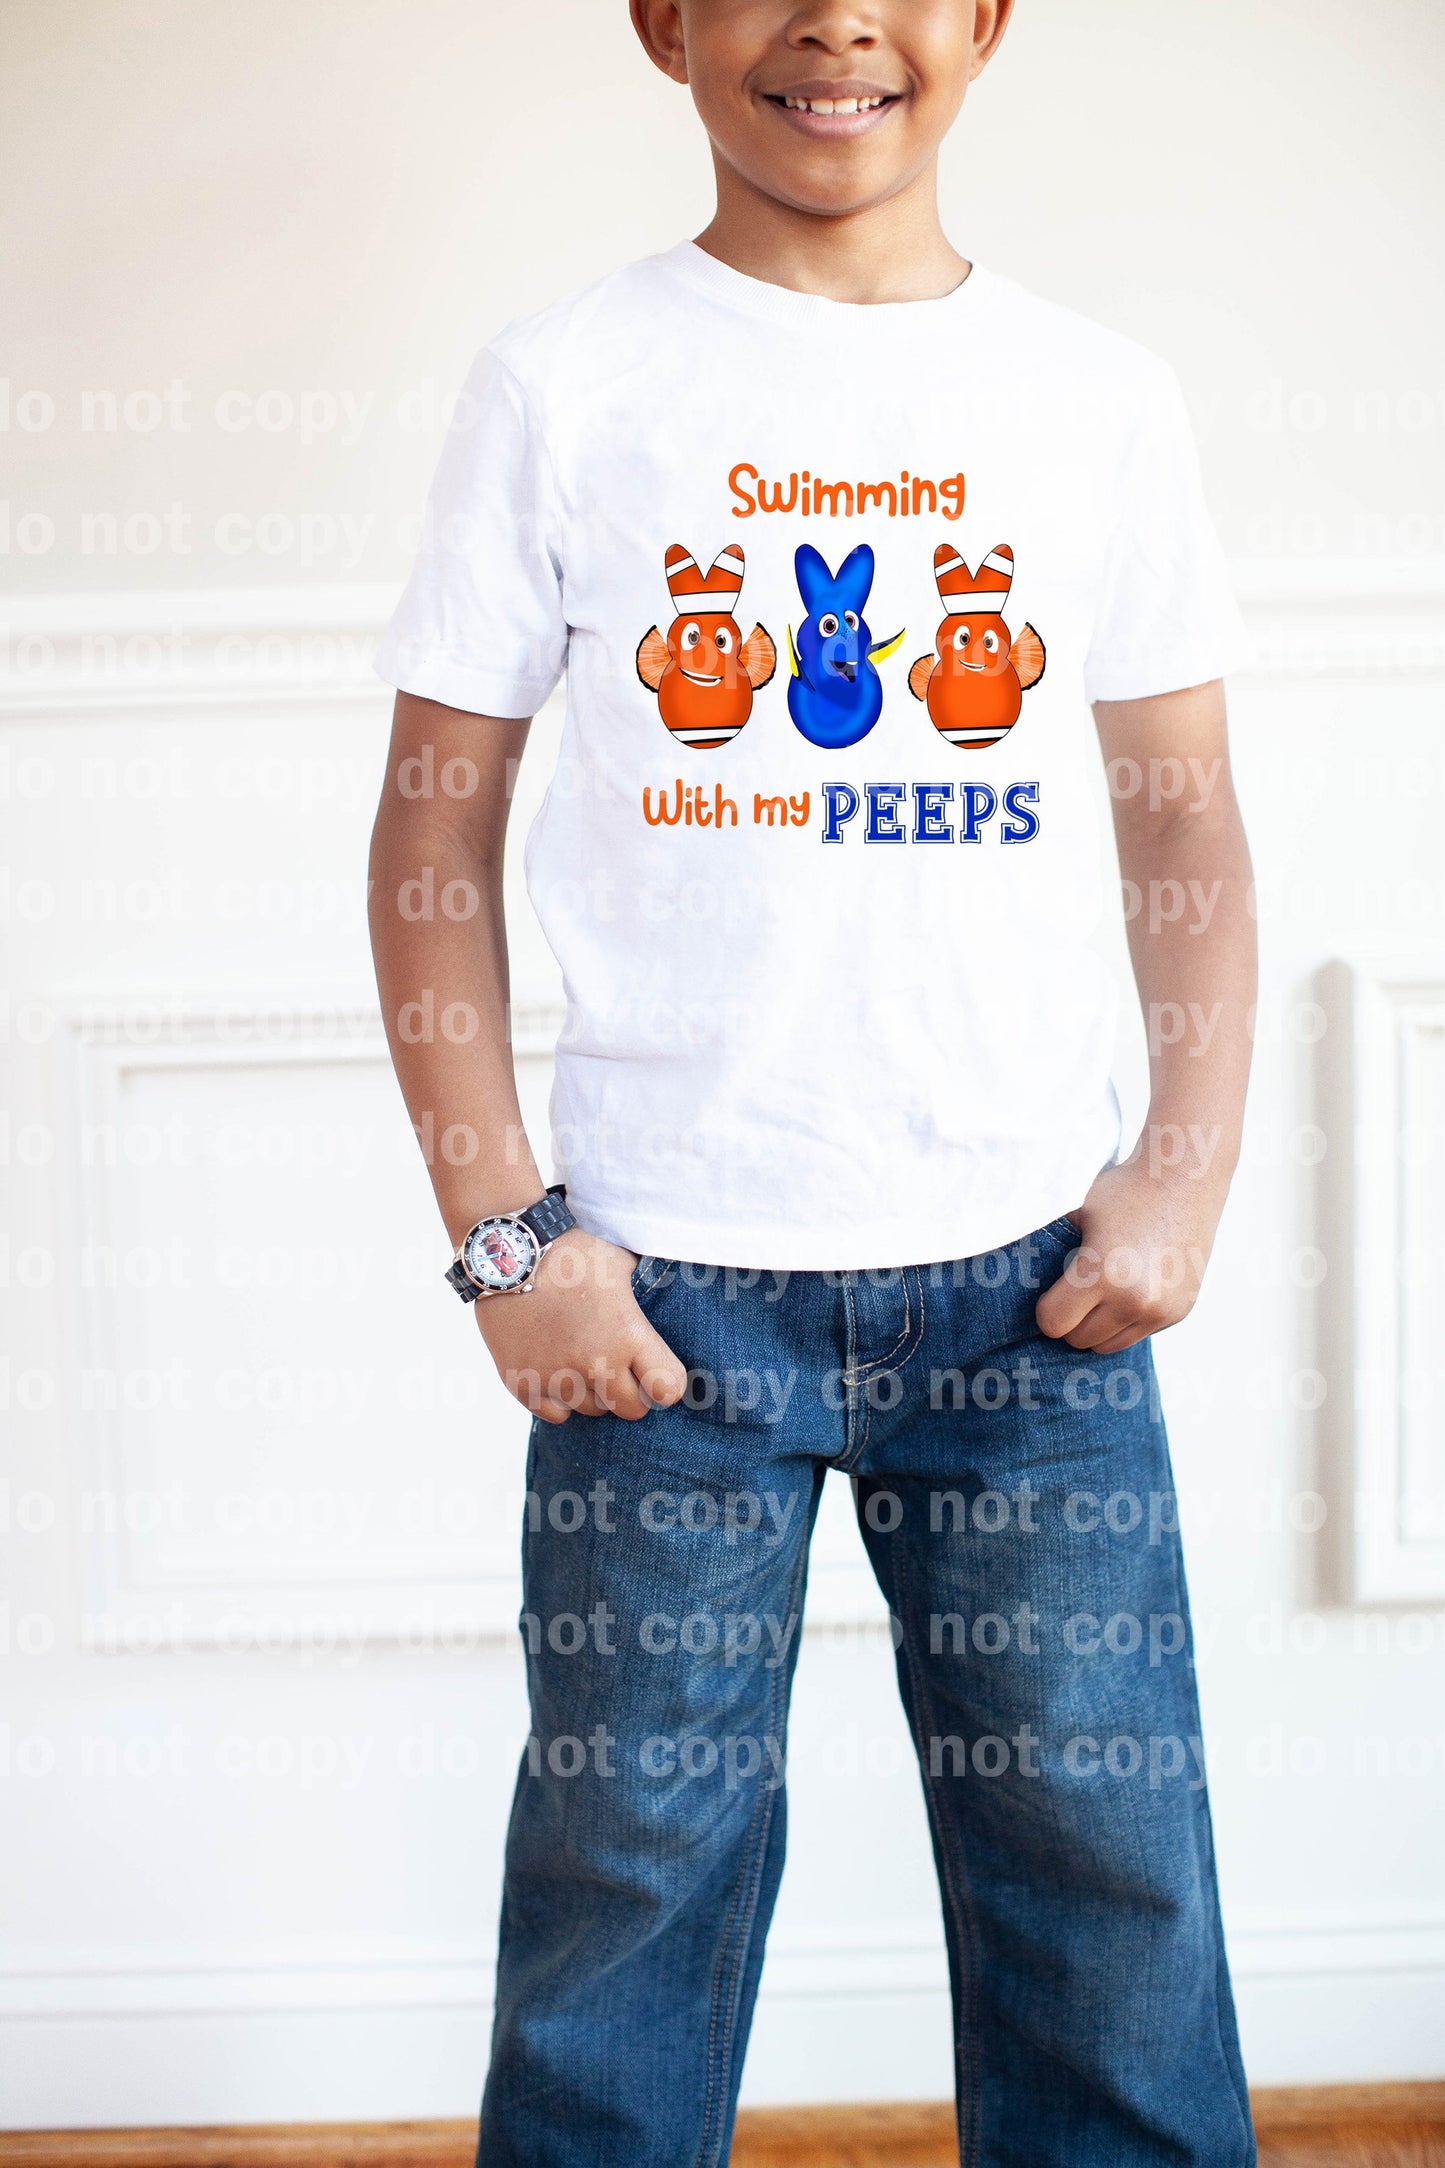 Swimming With My Peeps Dream Print or Sublimation Print